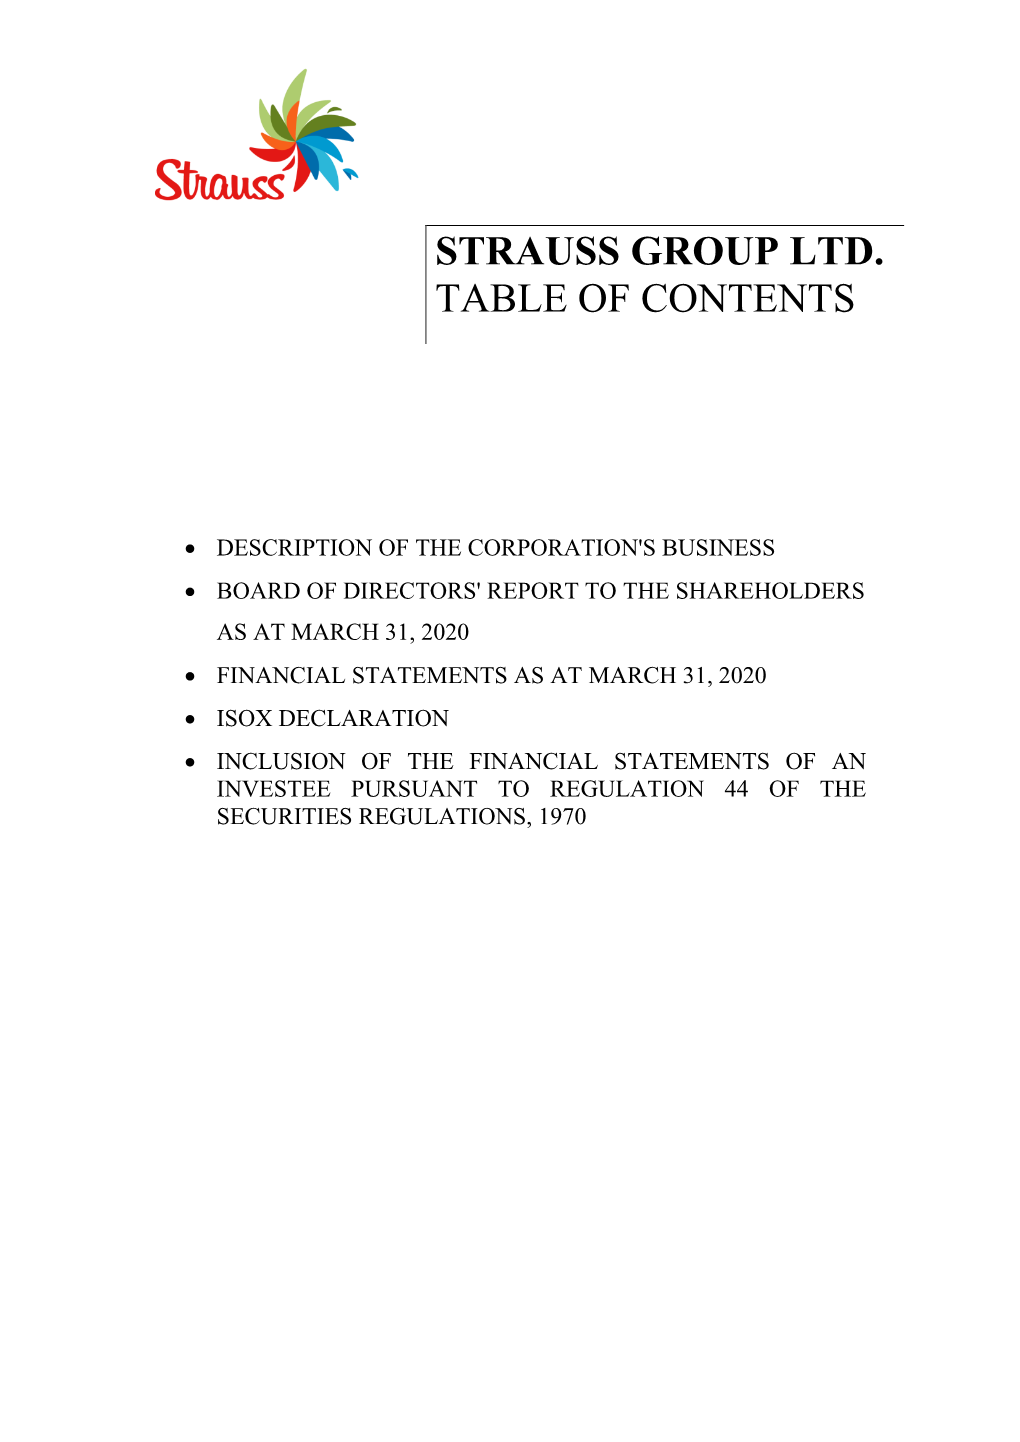 Strauss Group Ltd. Table of Contents